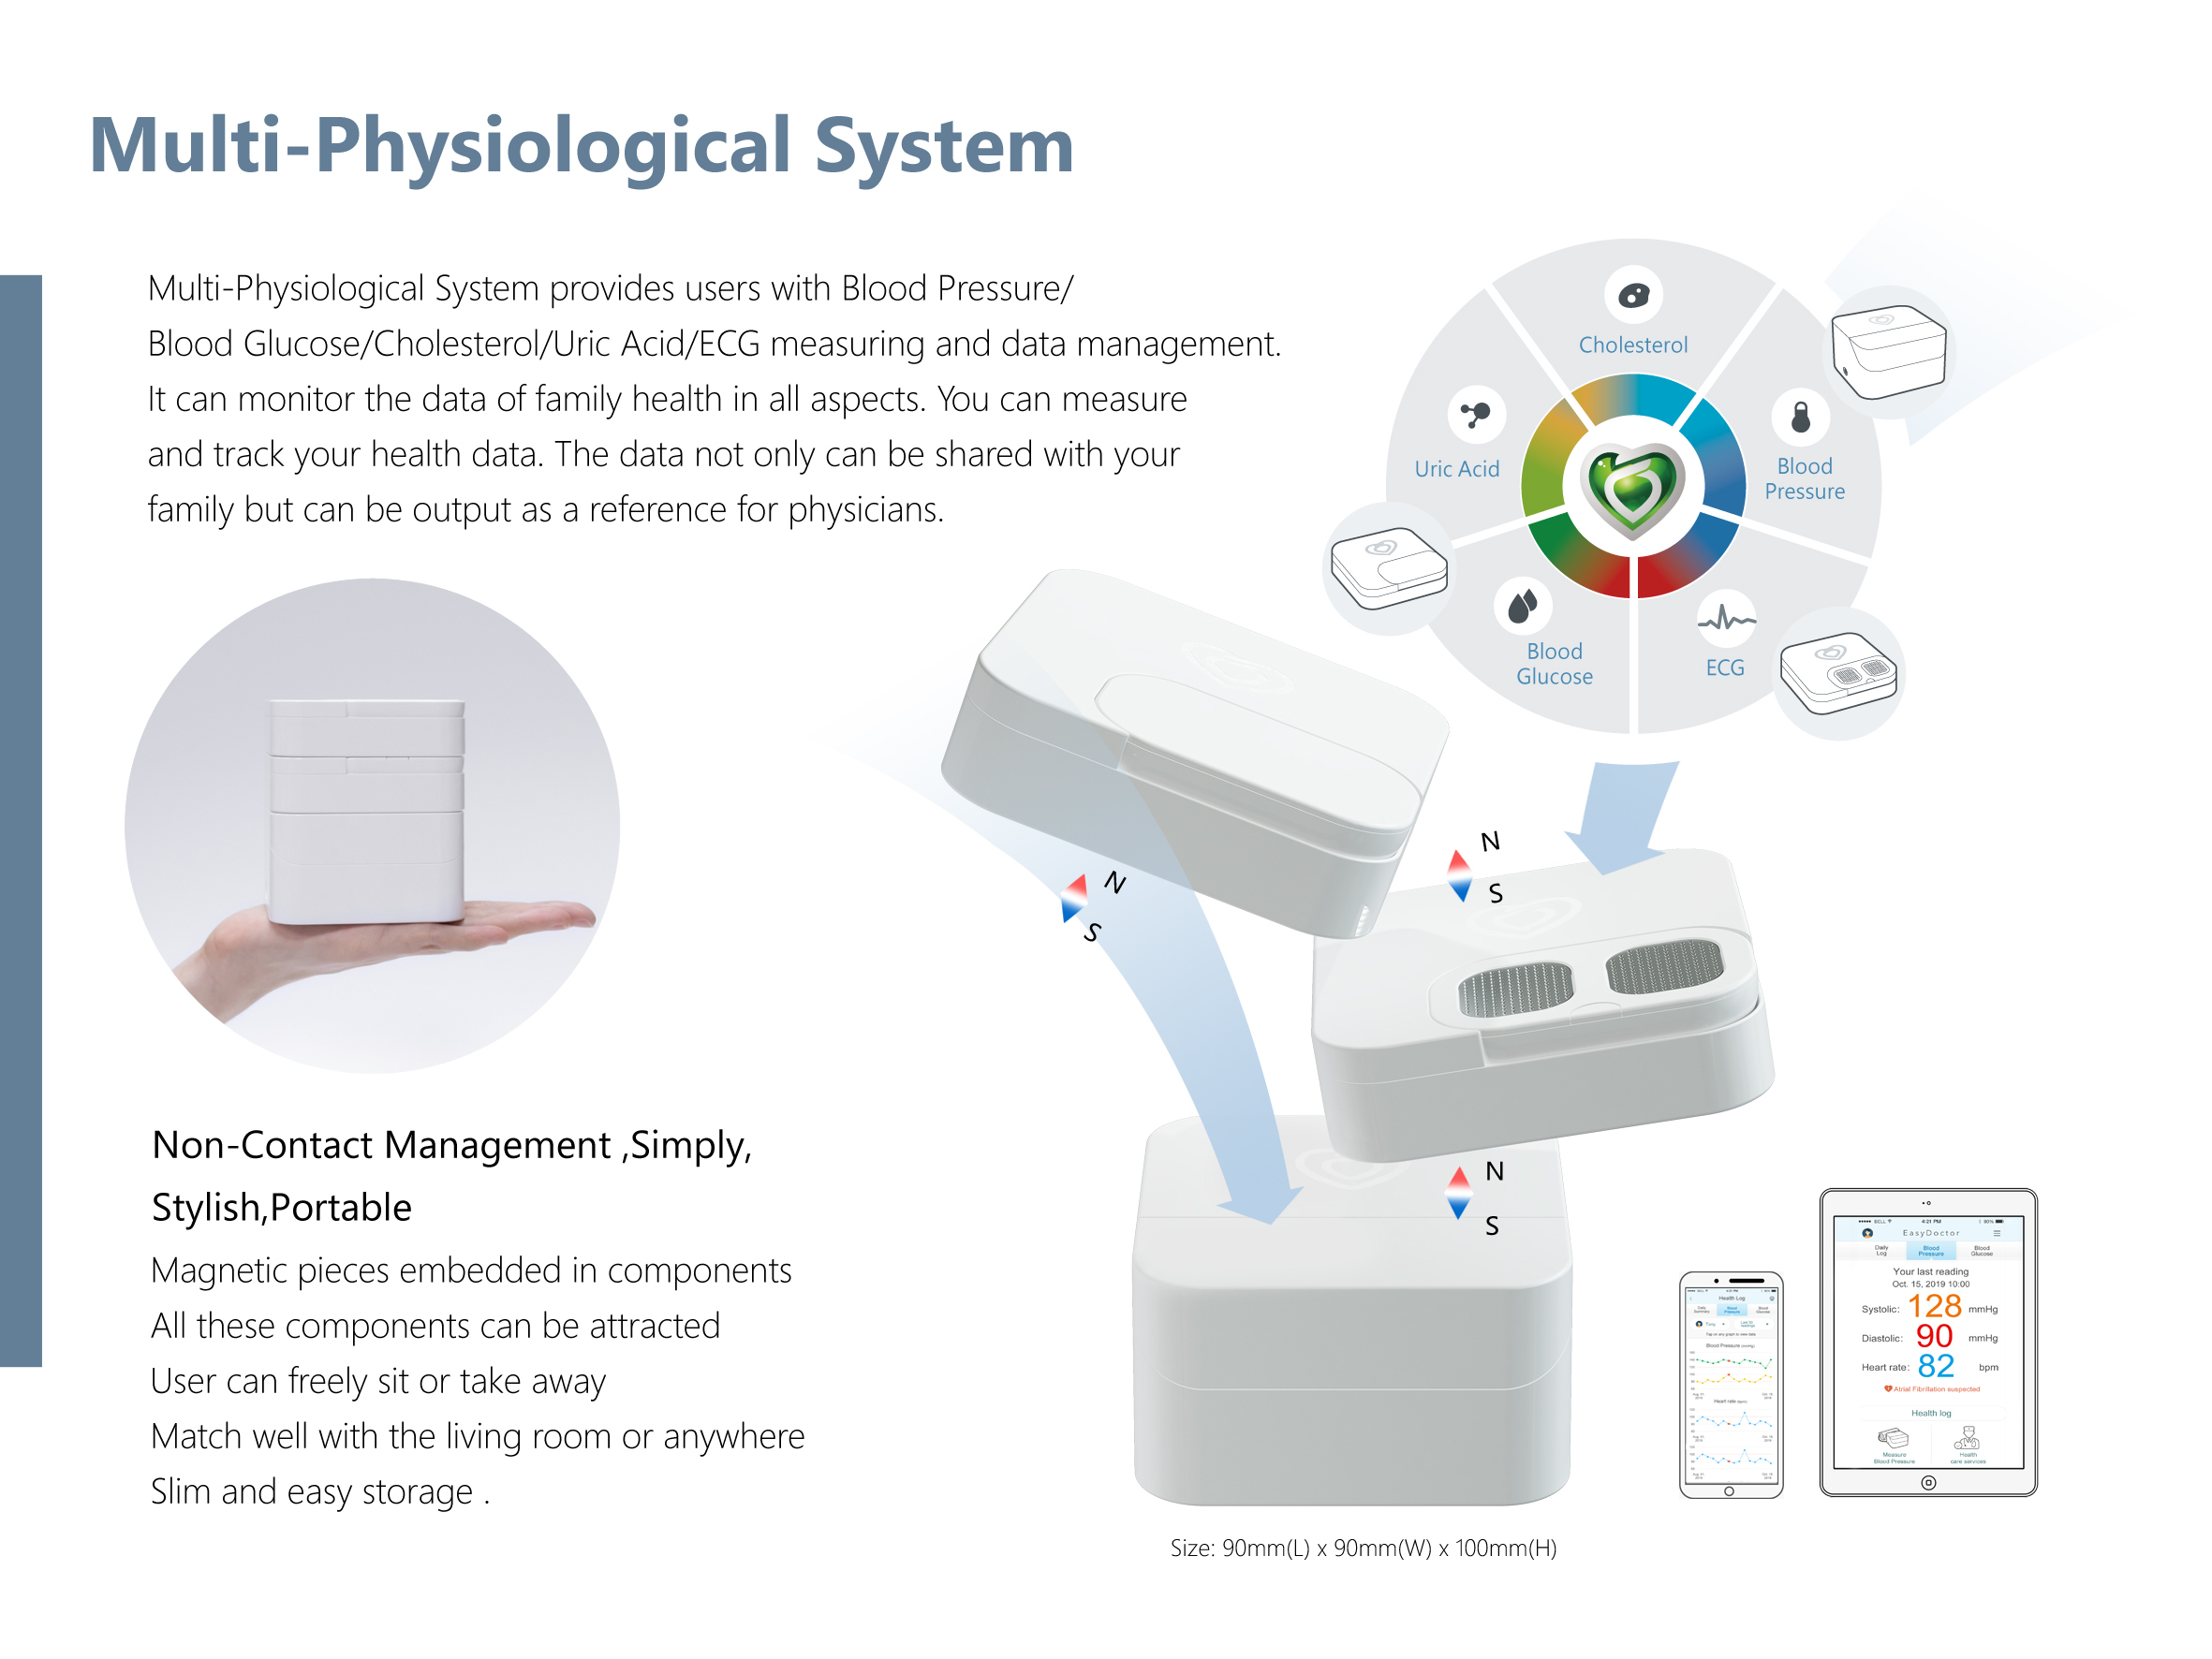 Multi-Physiological System